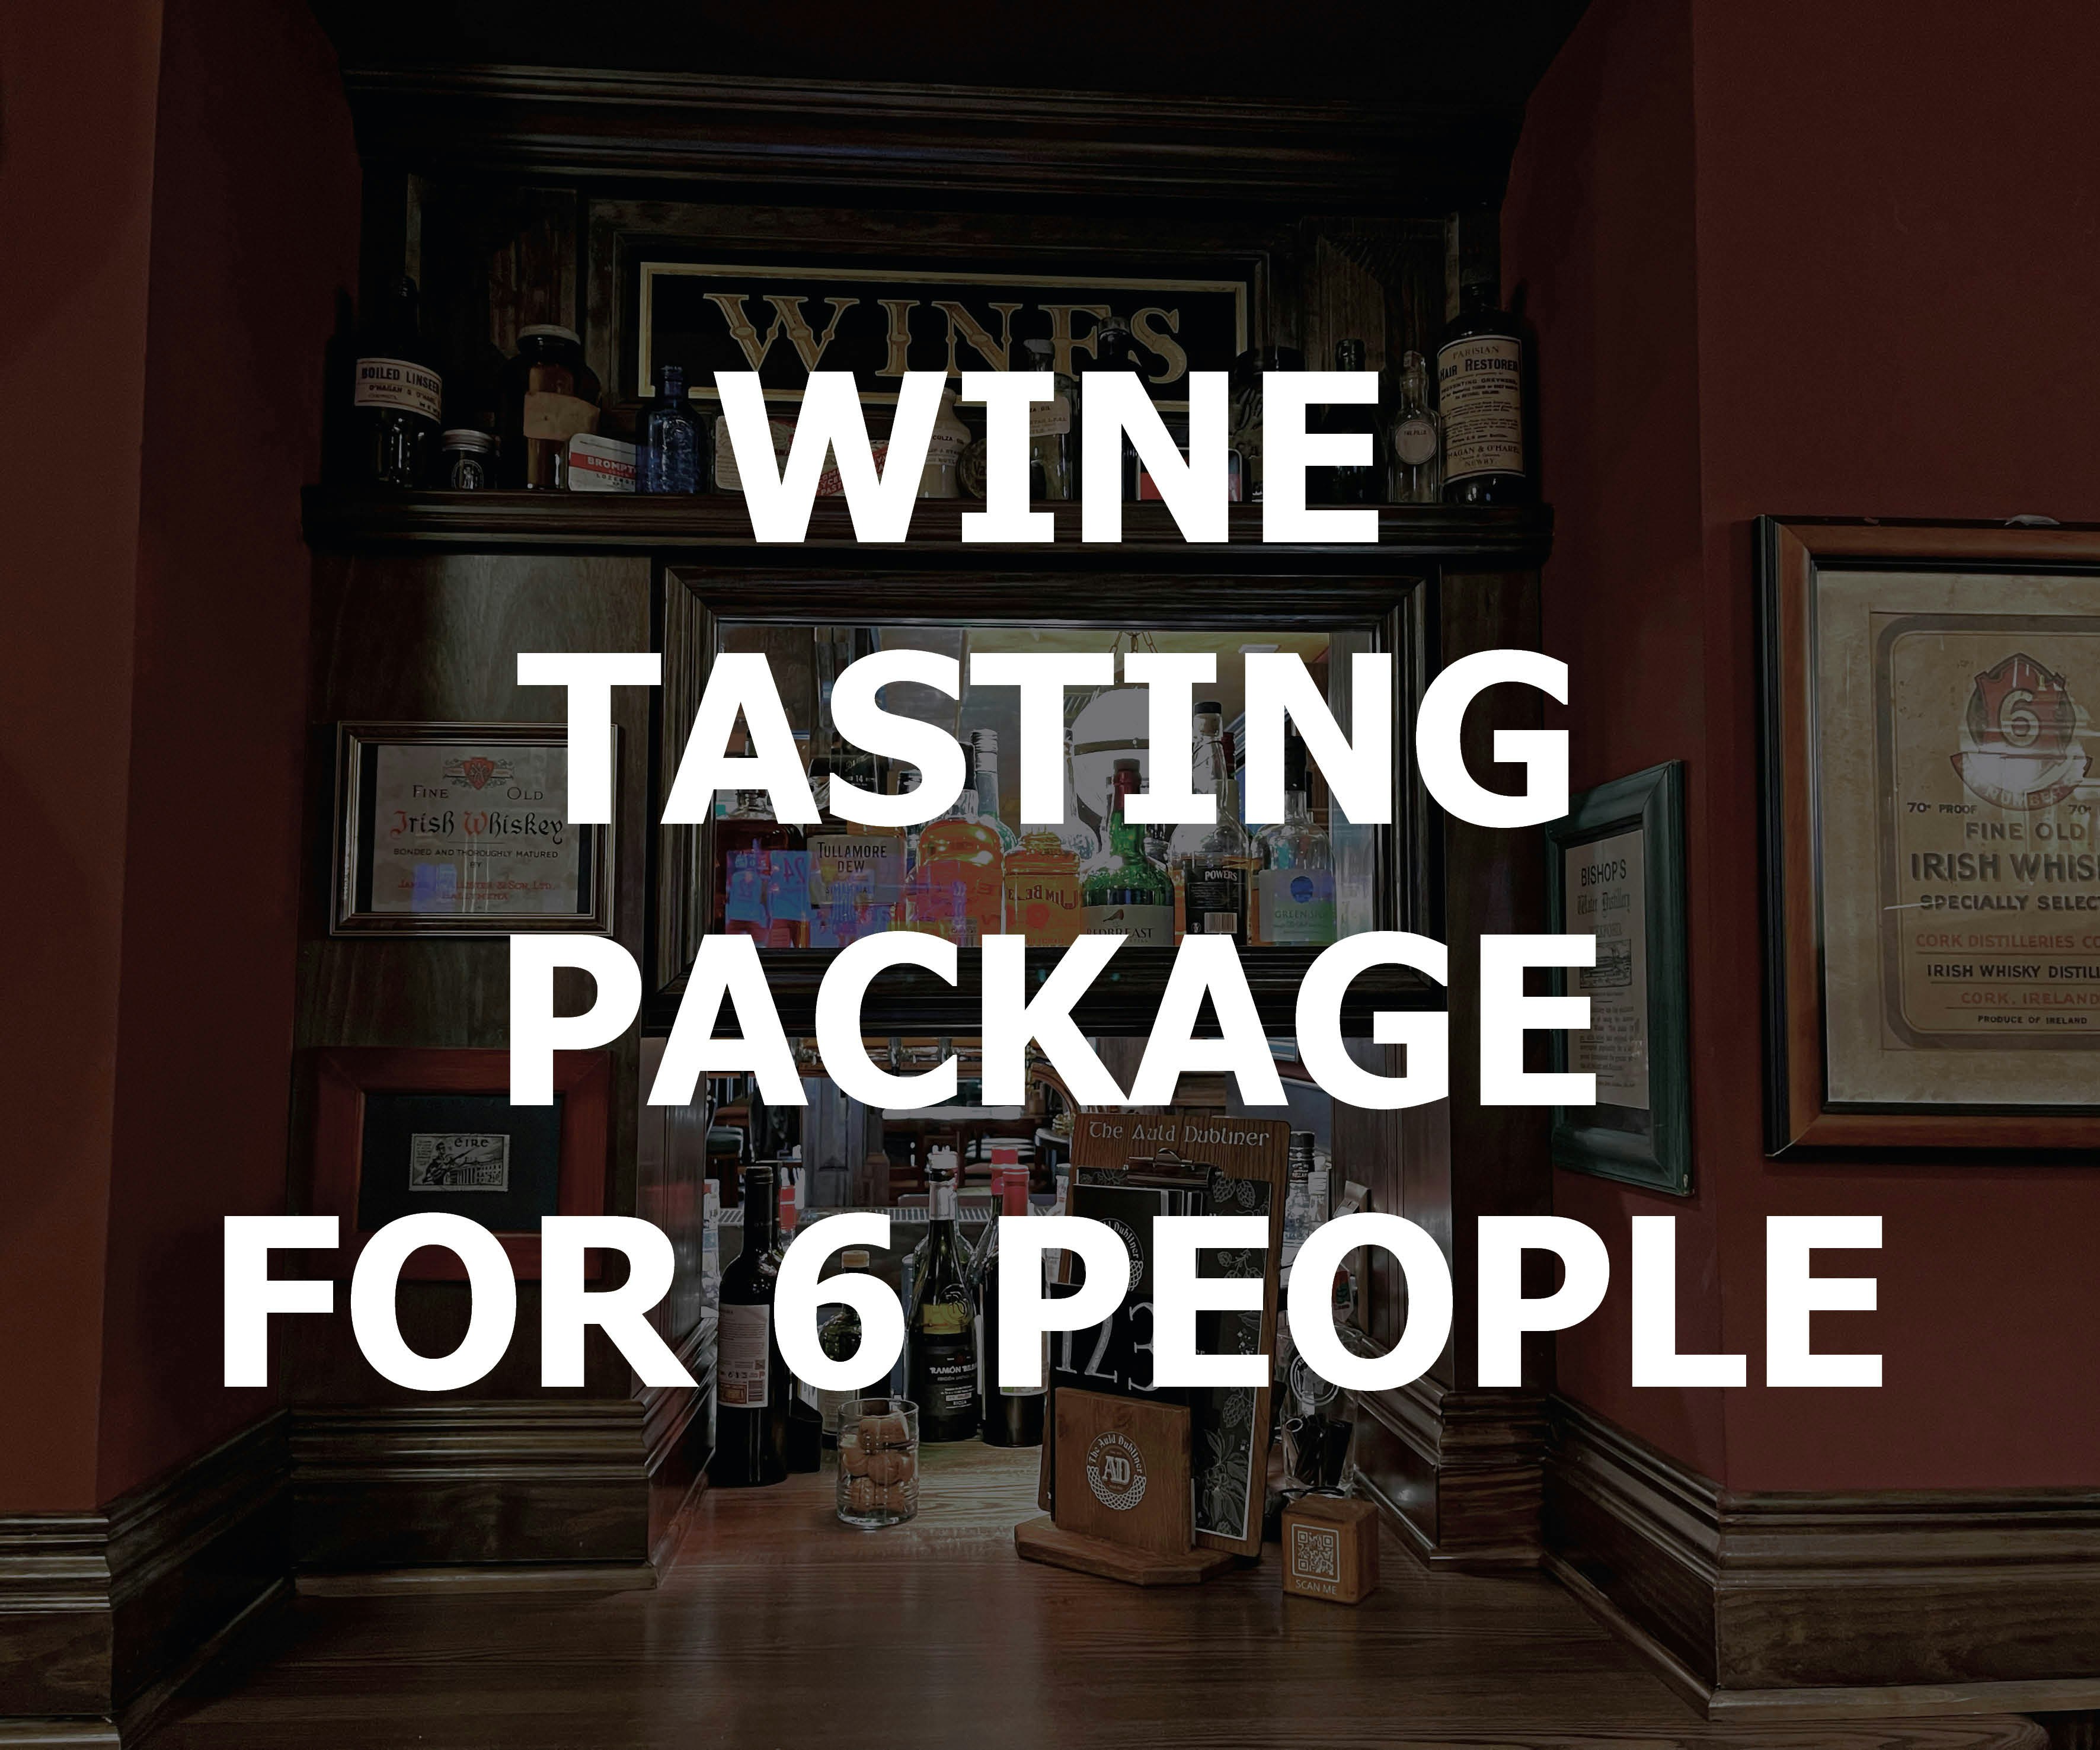 Wine seminar at the Auld Dubliner - package for 6 people